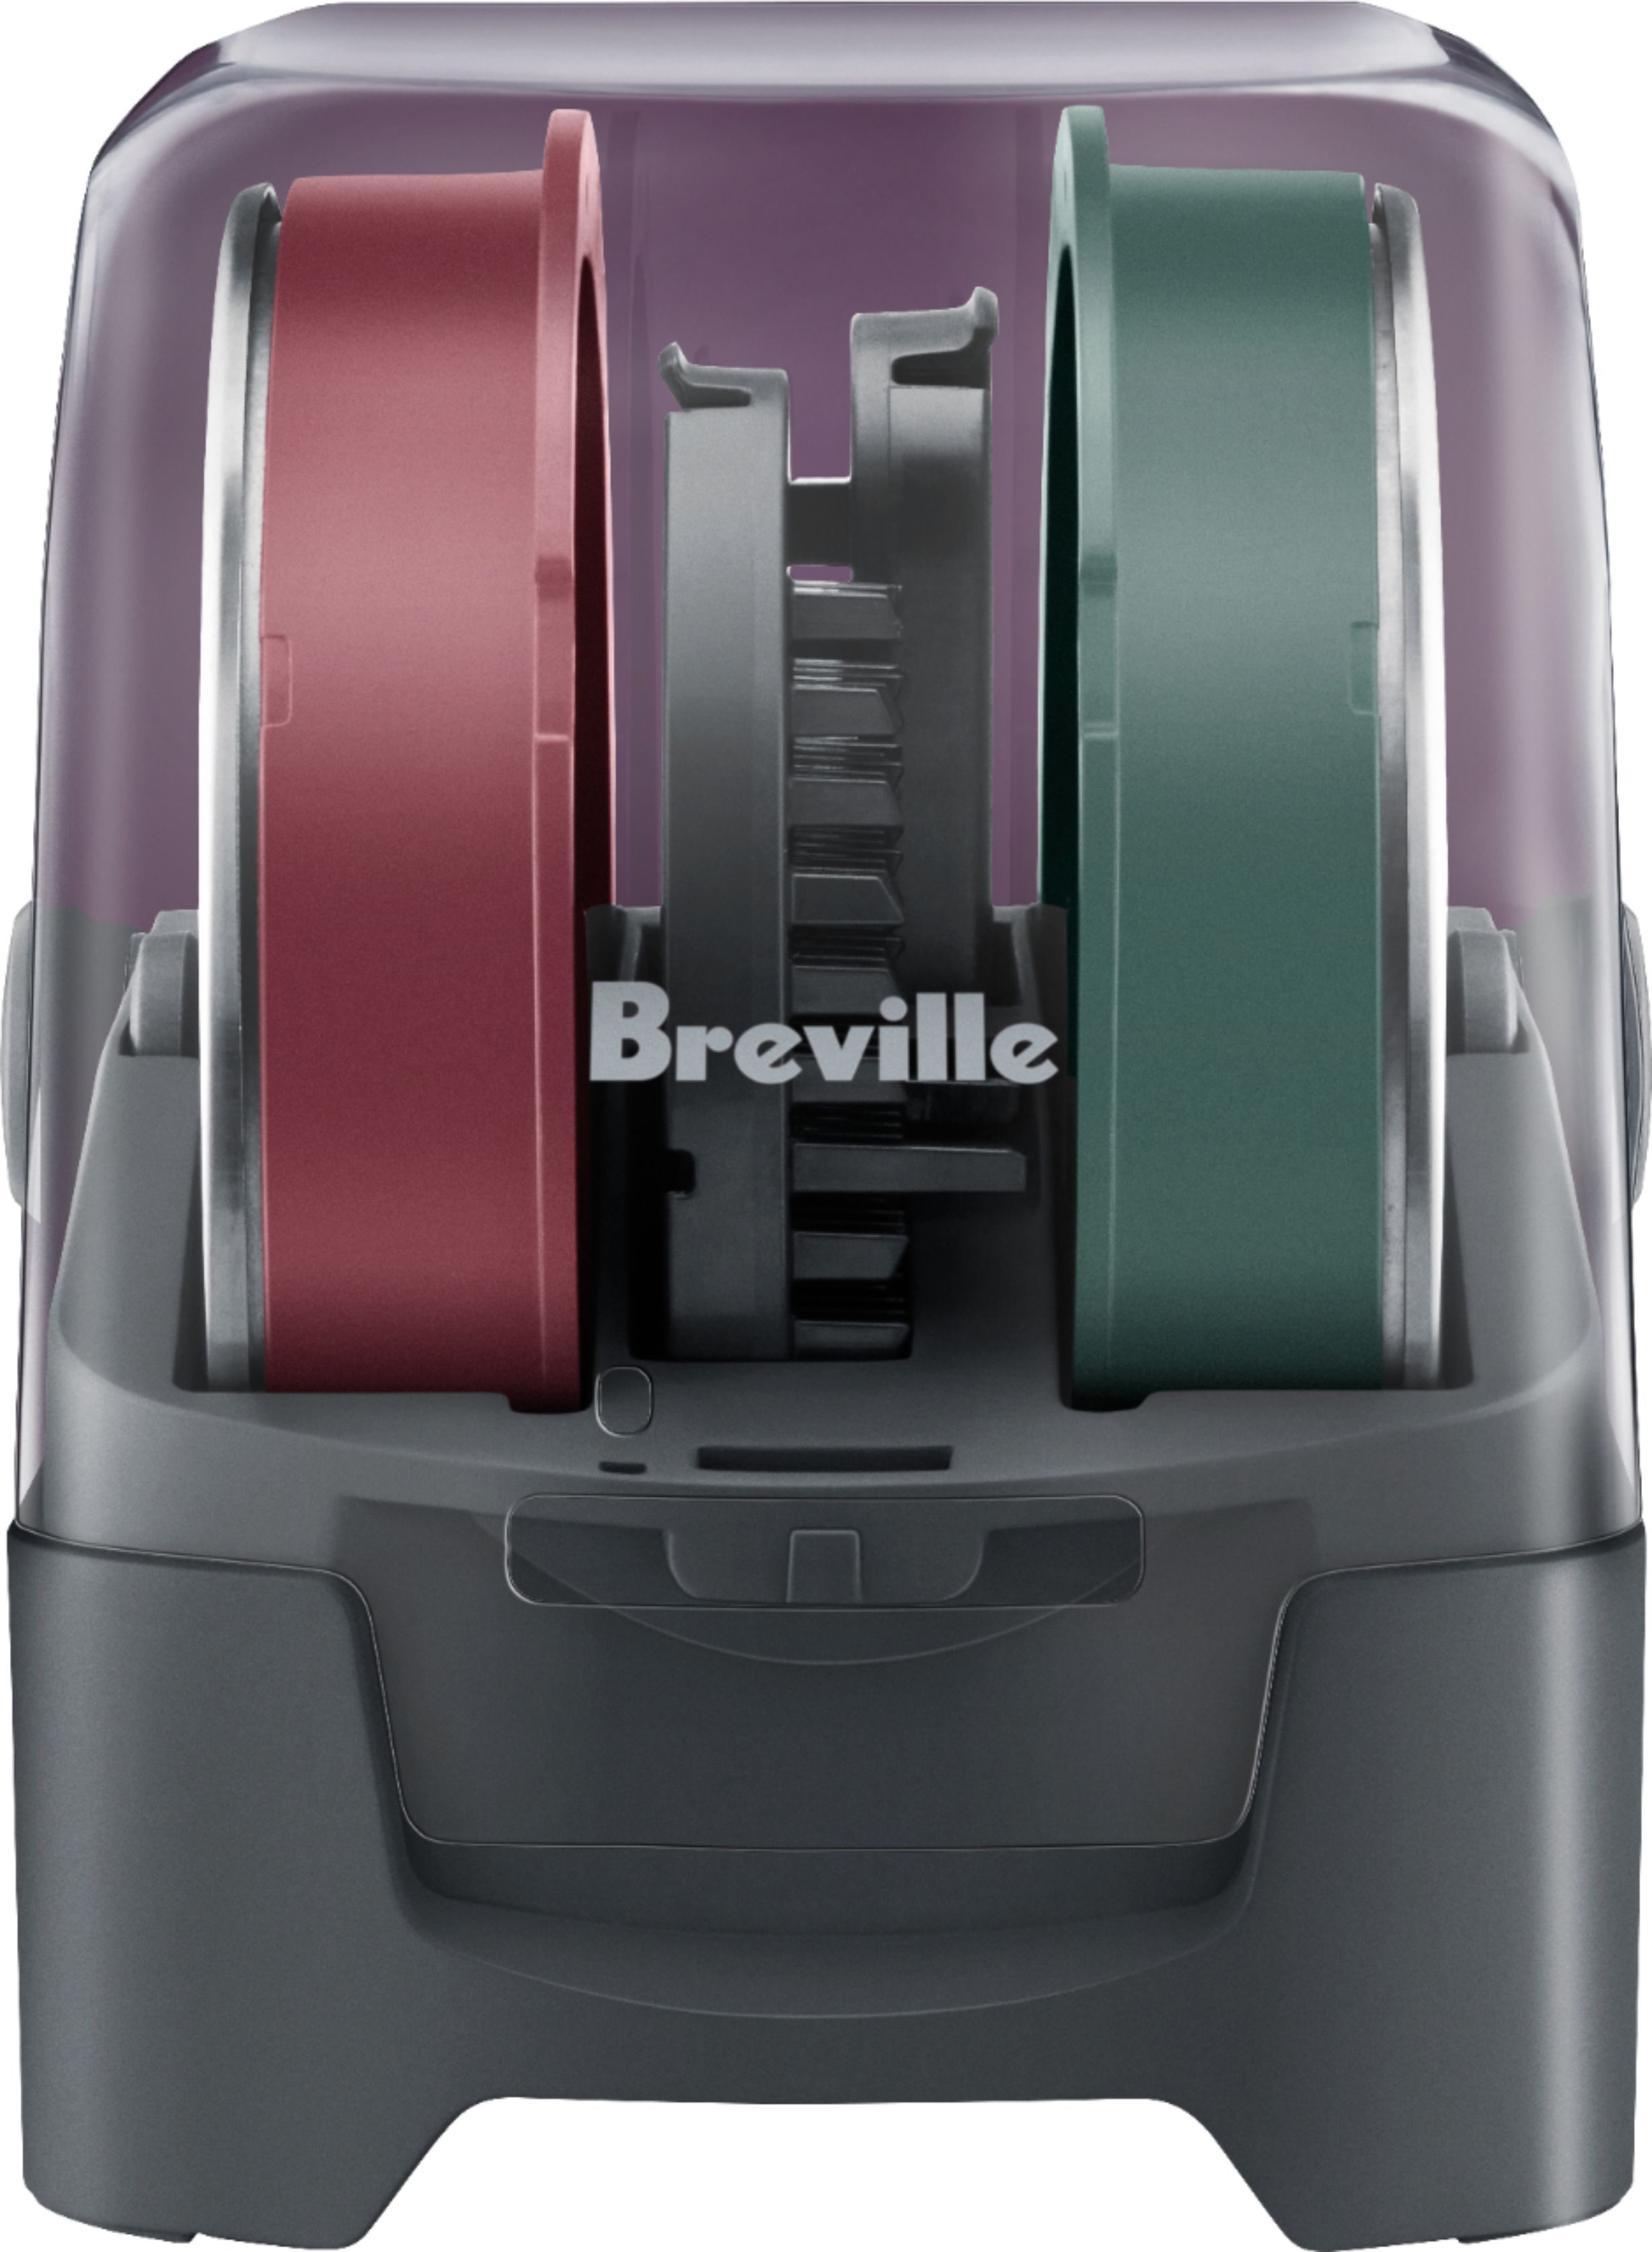 Angle View: Breville - 1-Speed Food Processor - Brushed Aluminum